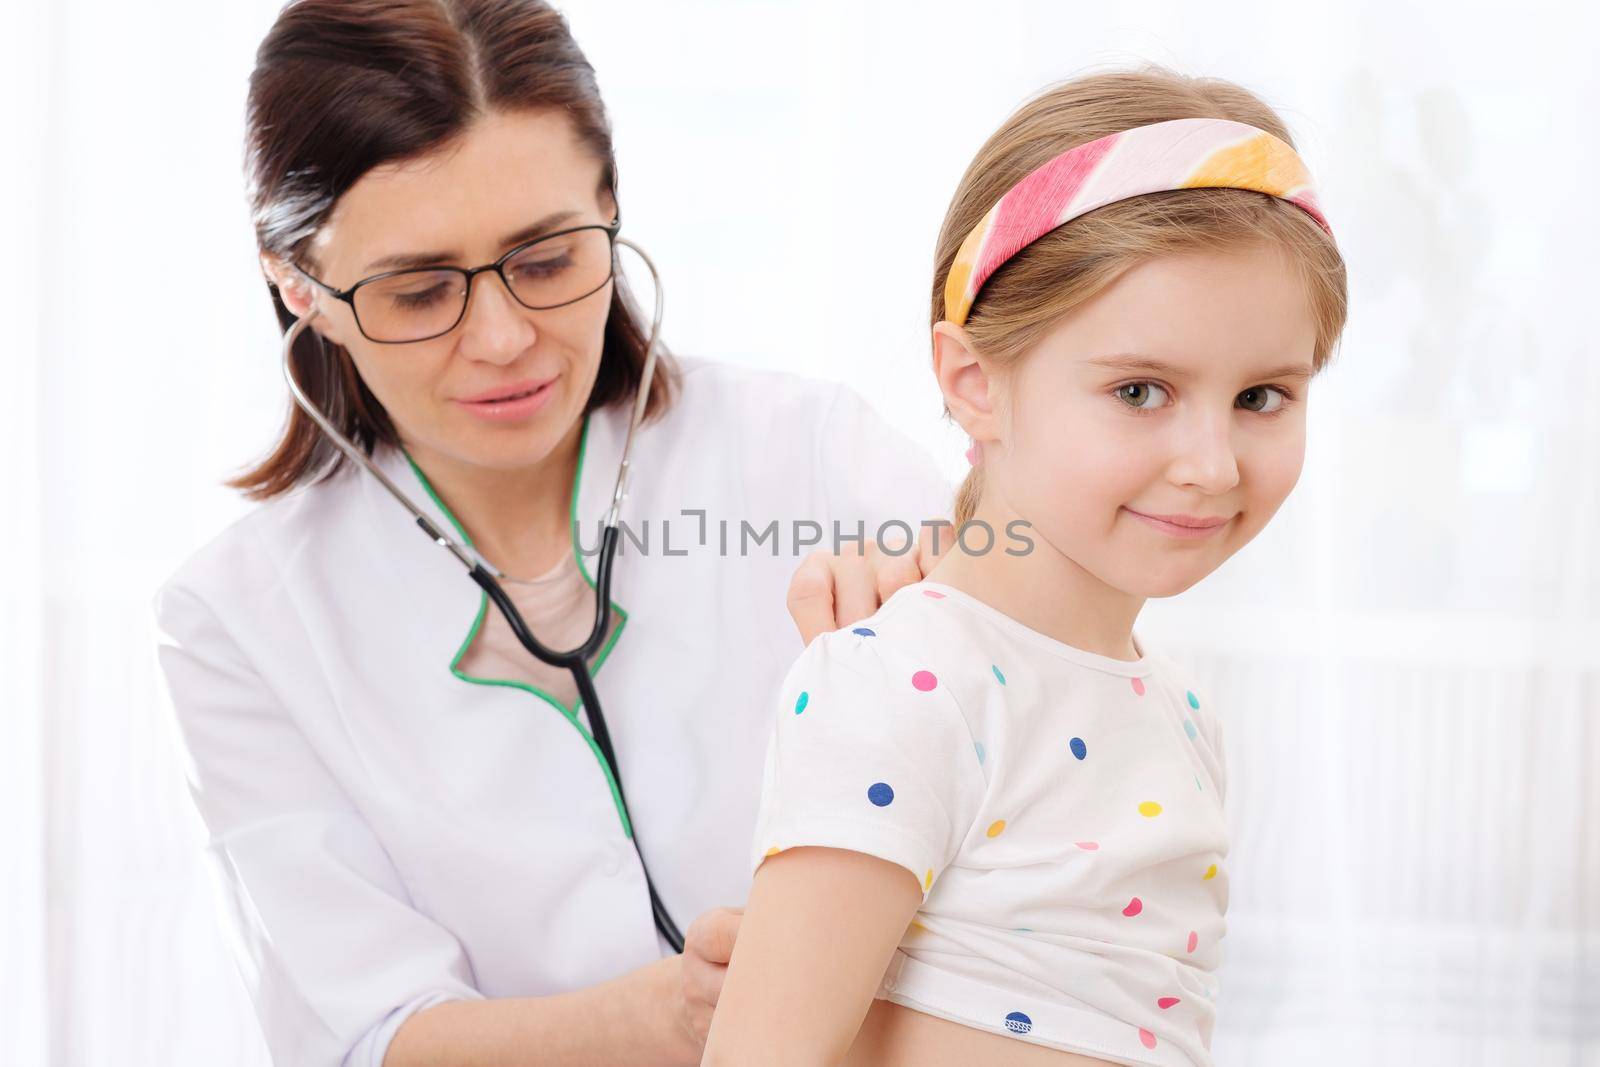 Female doctor listening to little girls internal sounds with stethoscope